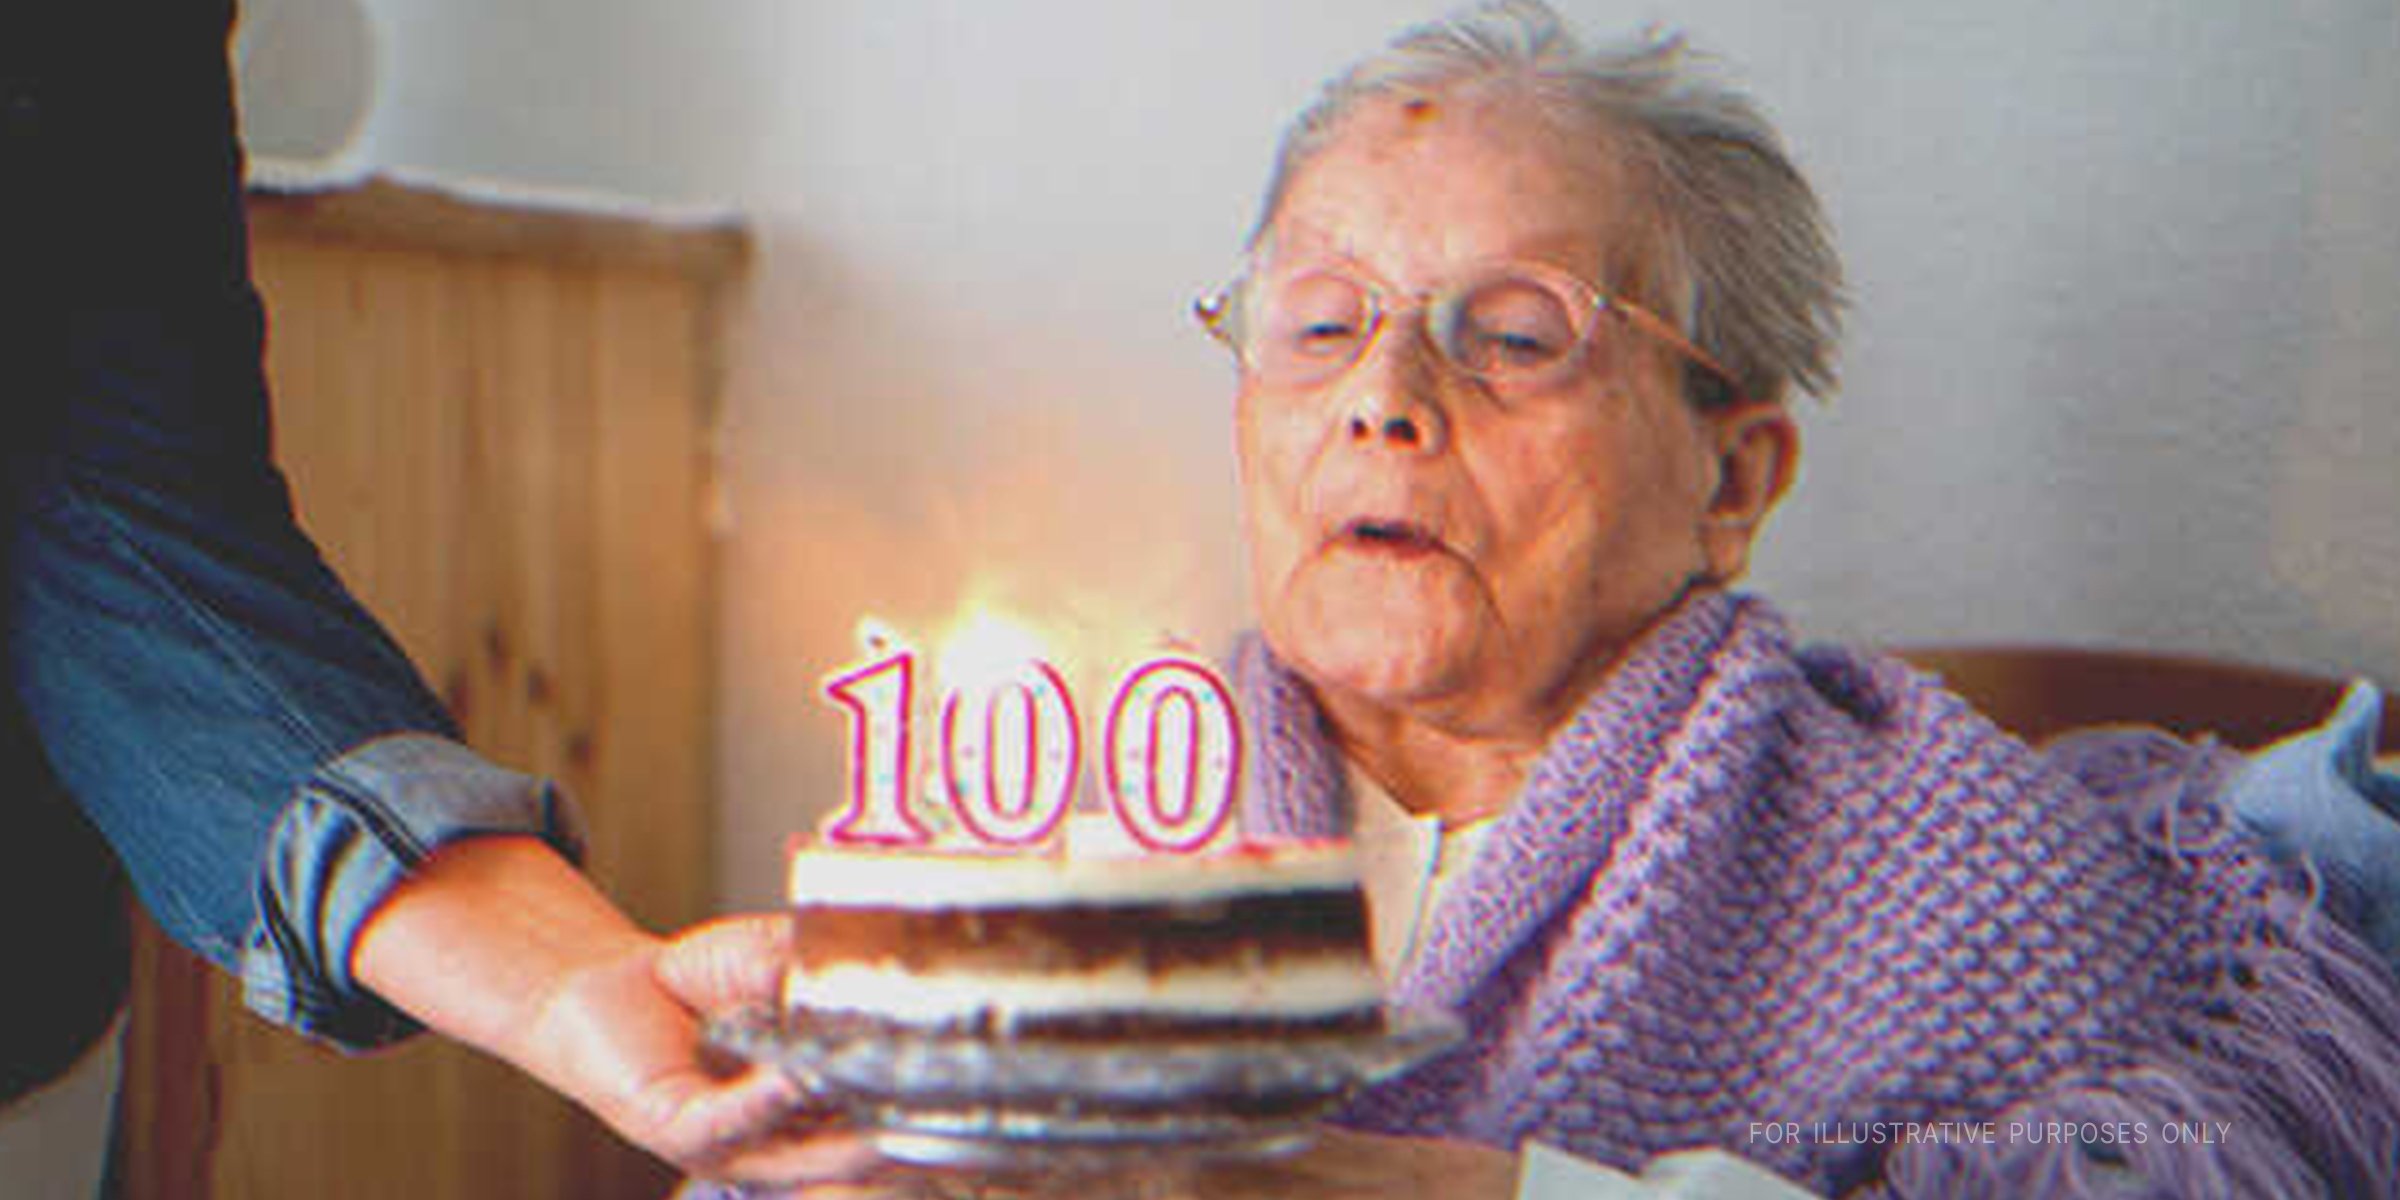 Older woman blowing birthday cake. | Source: Getty Images